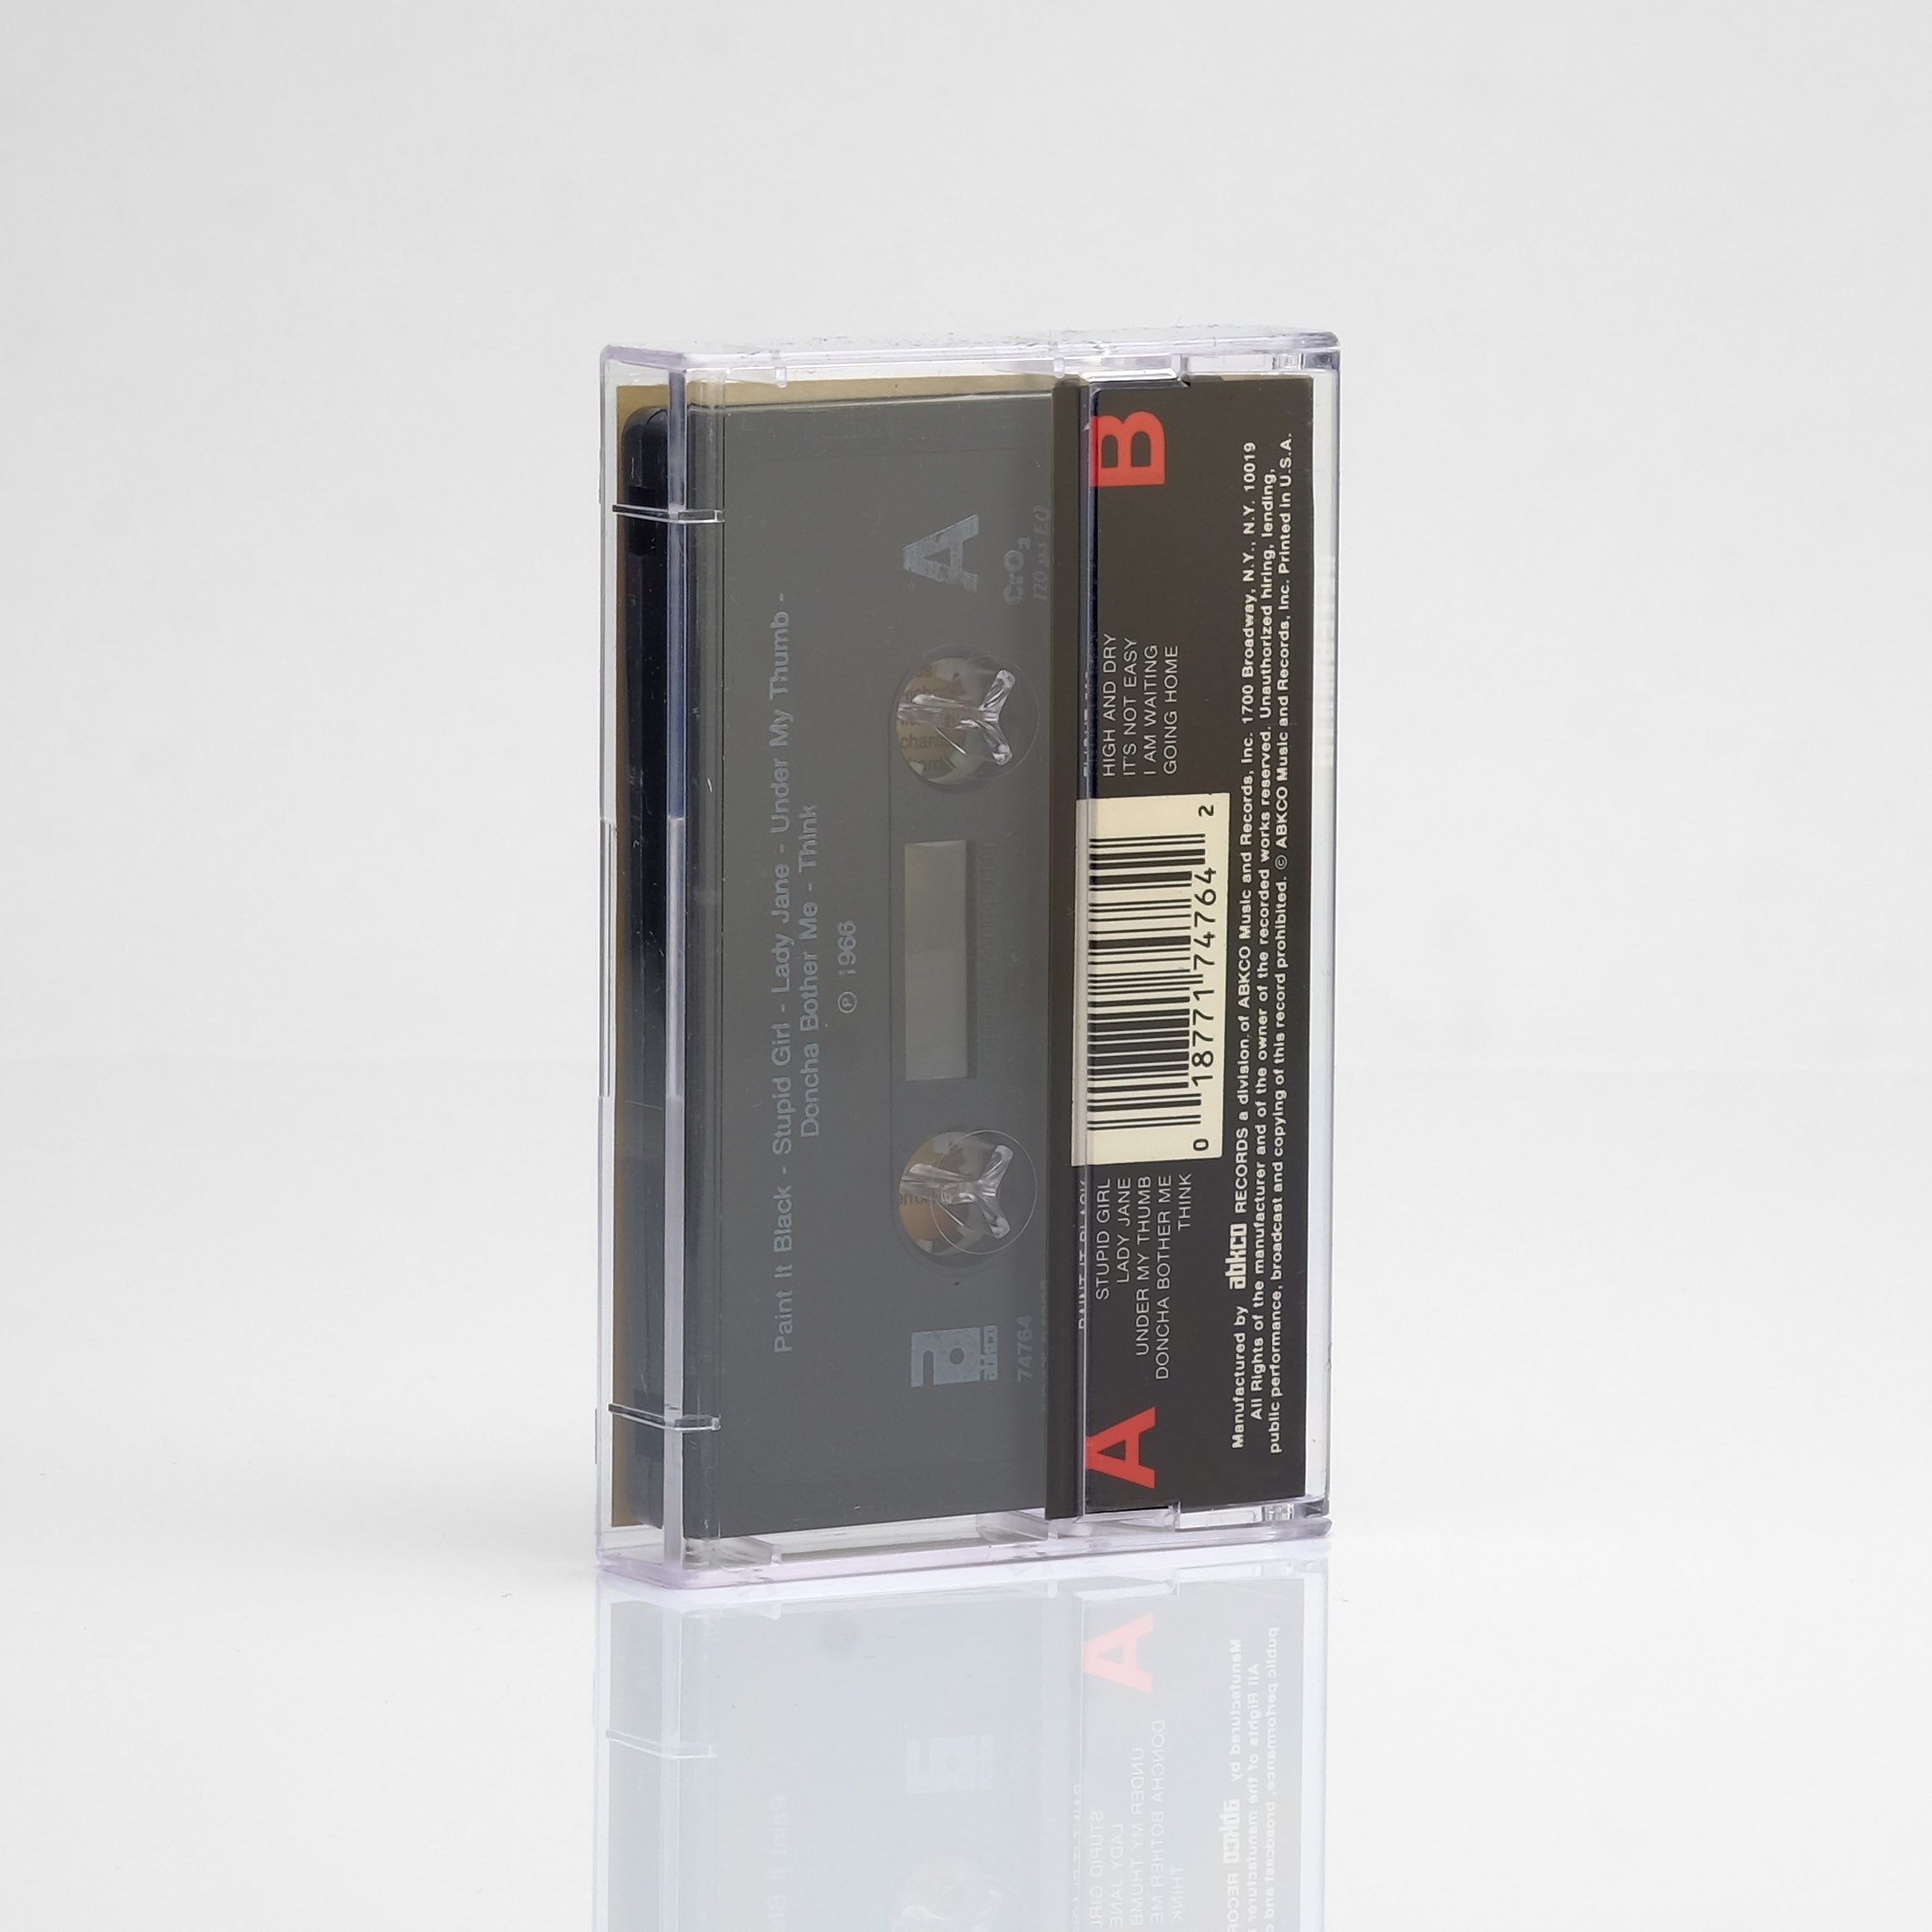 The Rolling Stones - Aftermath Cassette Tape